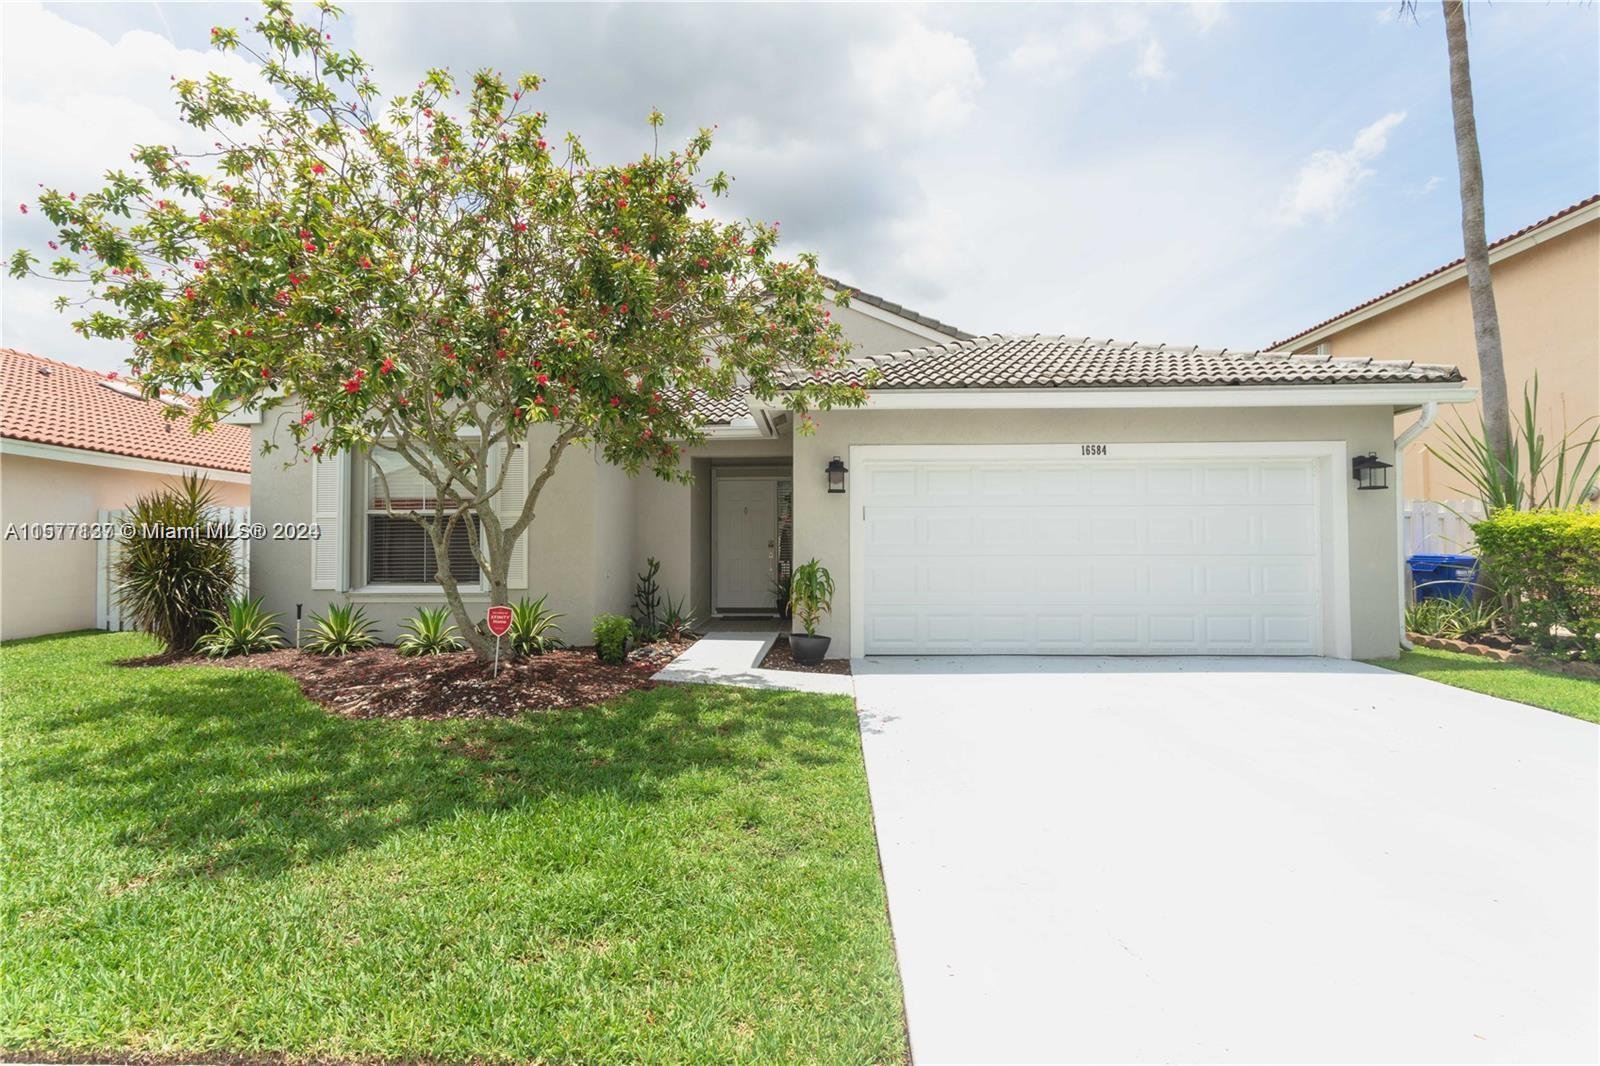 16584 Nw 10th St, Pembroke Pines, Miami-Dade County, Florida - 3 Bedrooms  
2 Bathrooms - 